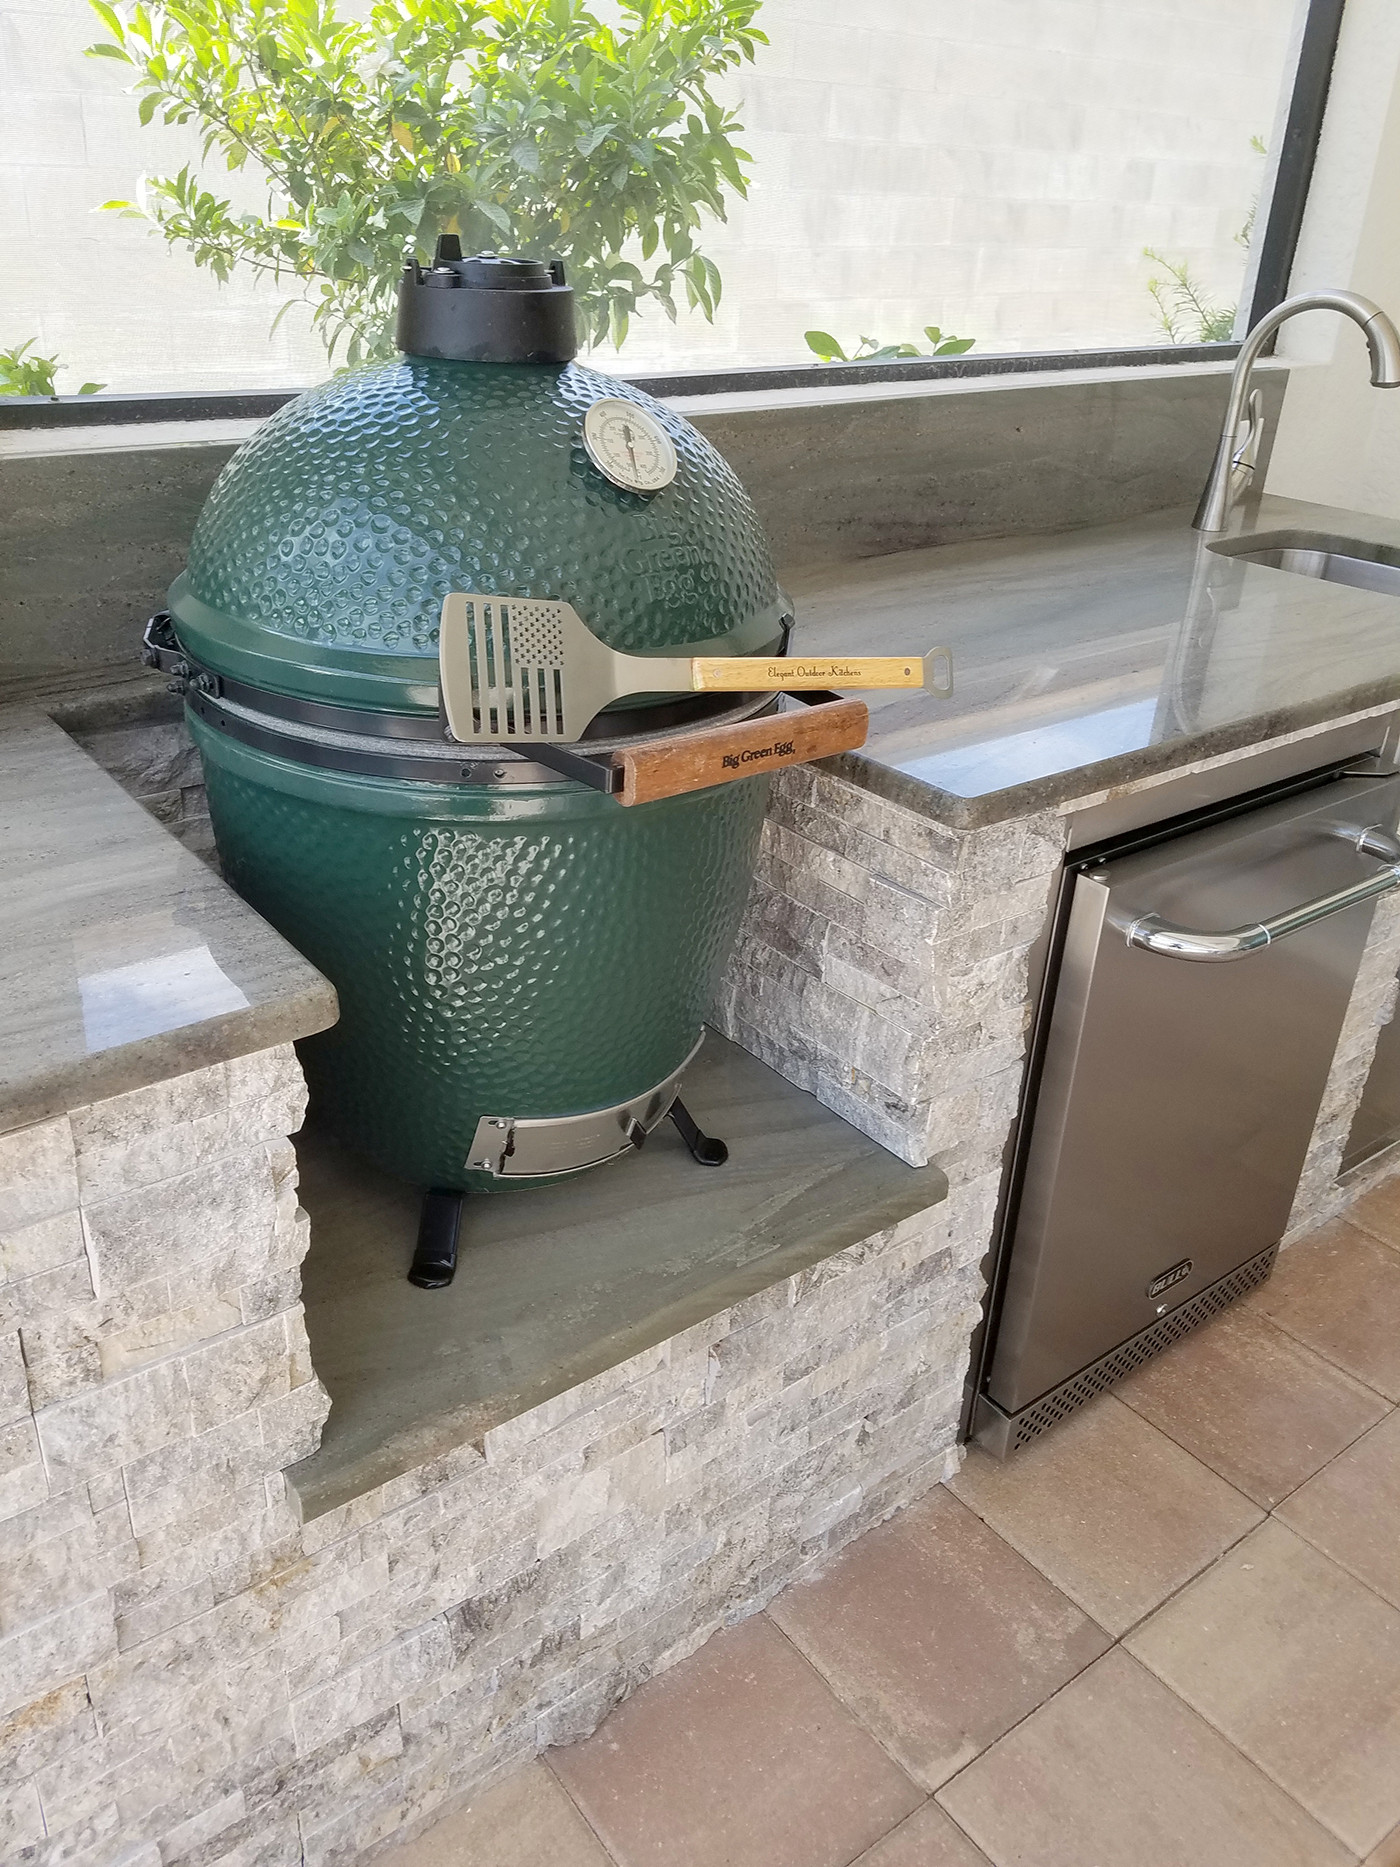 Green Egg Outdoor Kitchen
 The Big Green Egg Outdoor Kitchen Elegant Outdoor Kitchens